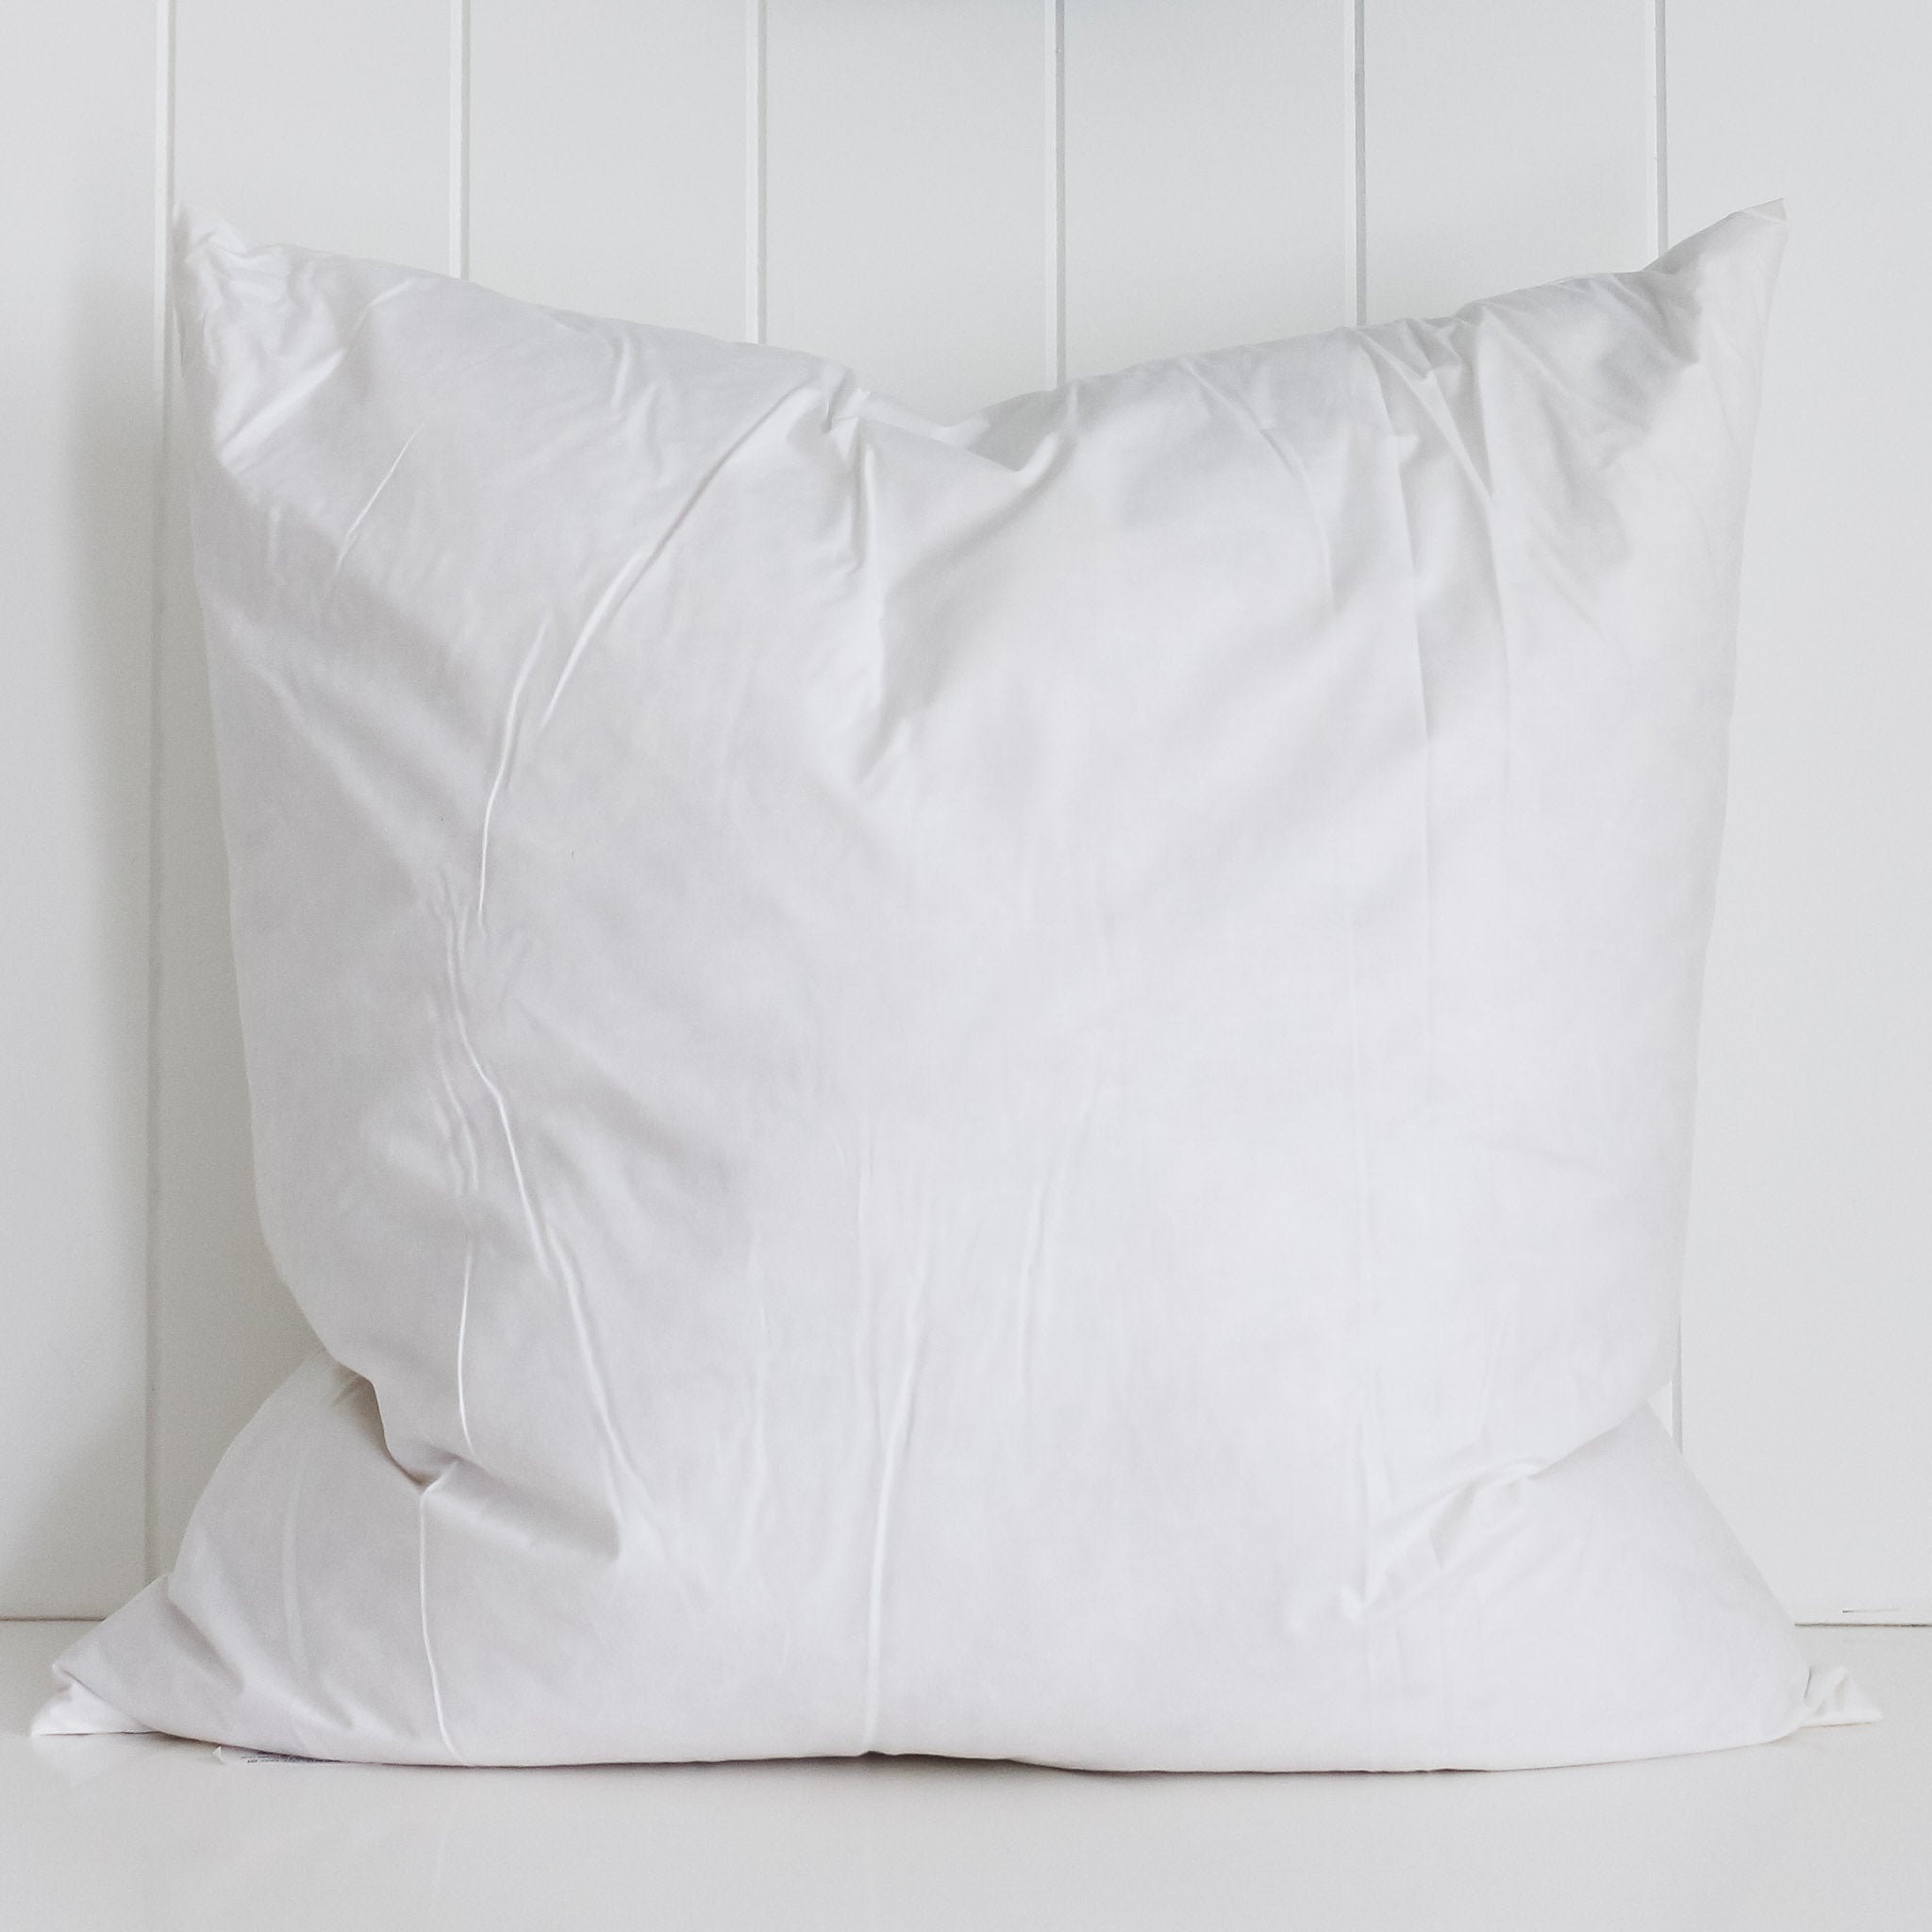 Feather Filled Cushion Insert - Square 55cm - Hydrangea Lane Home